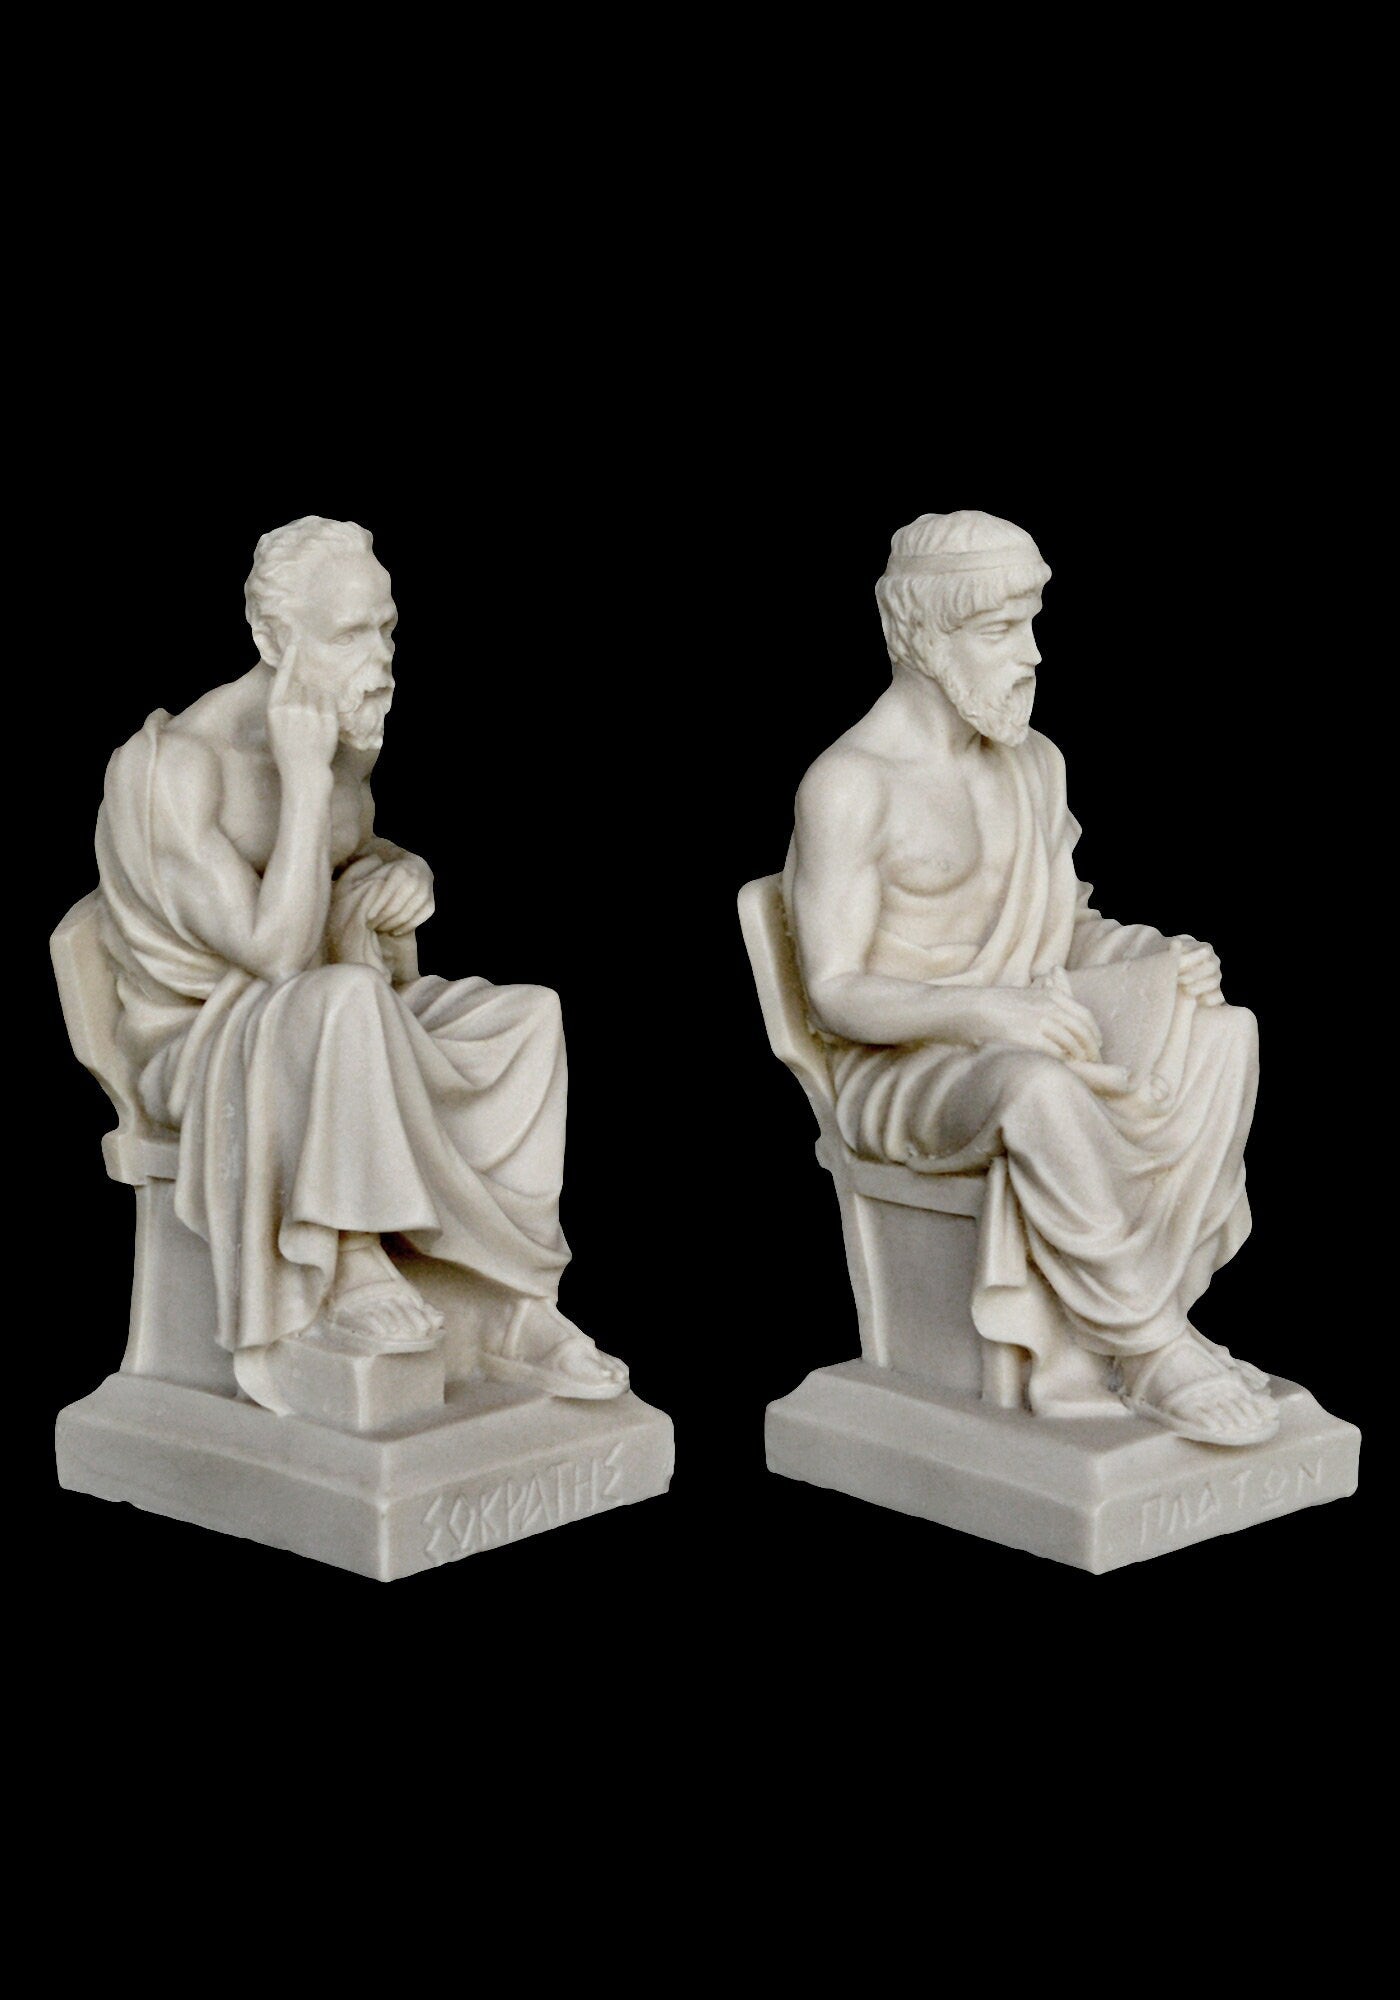 Socrates and Plato Set - Teacher and Student - Fathers of Western Philosophy - Alabaster Sculptures